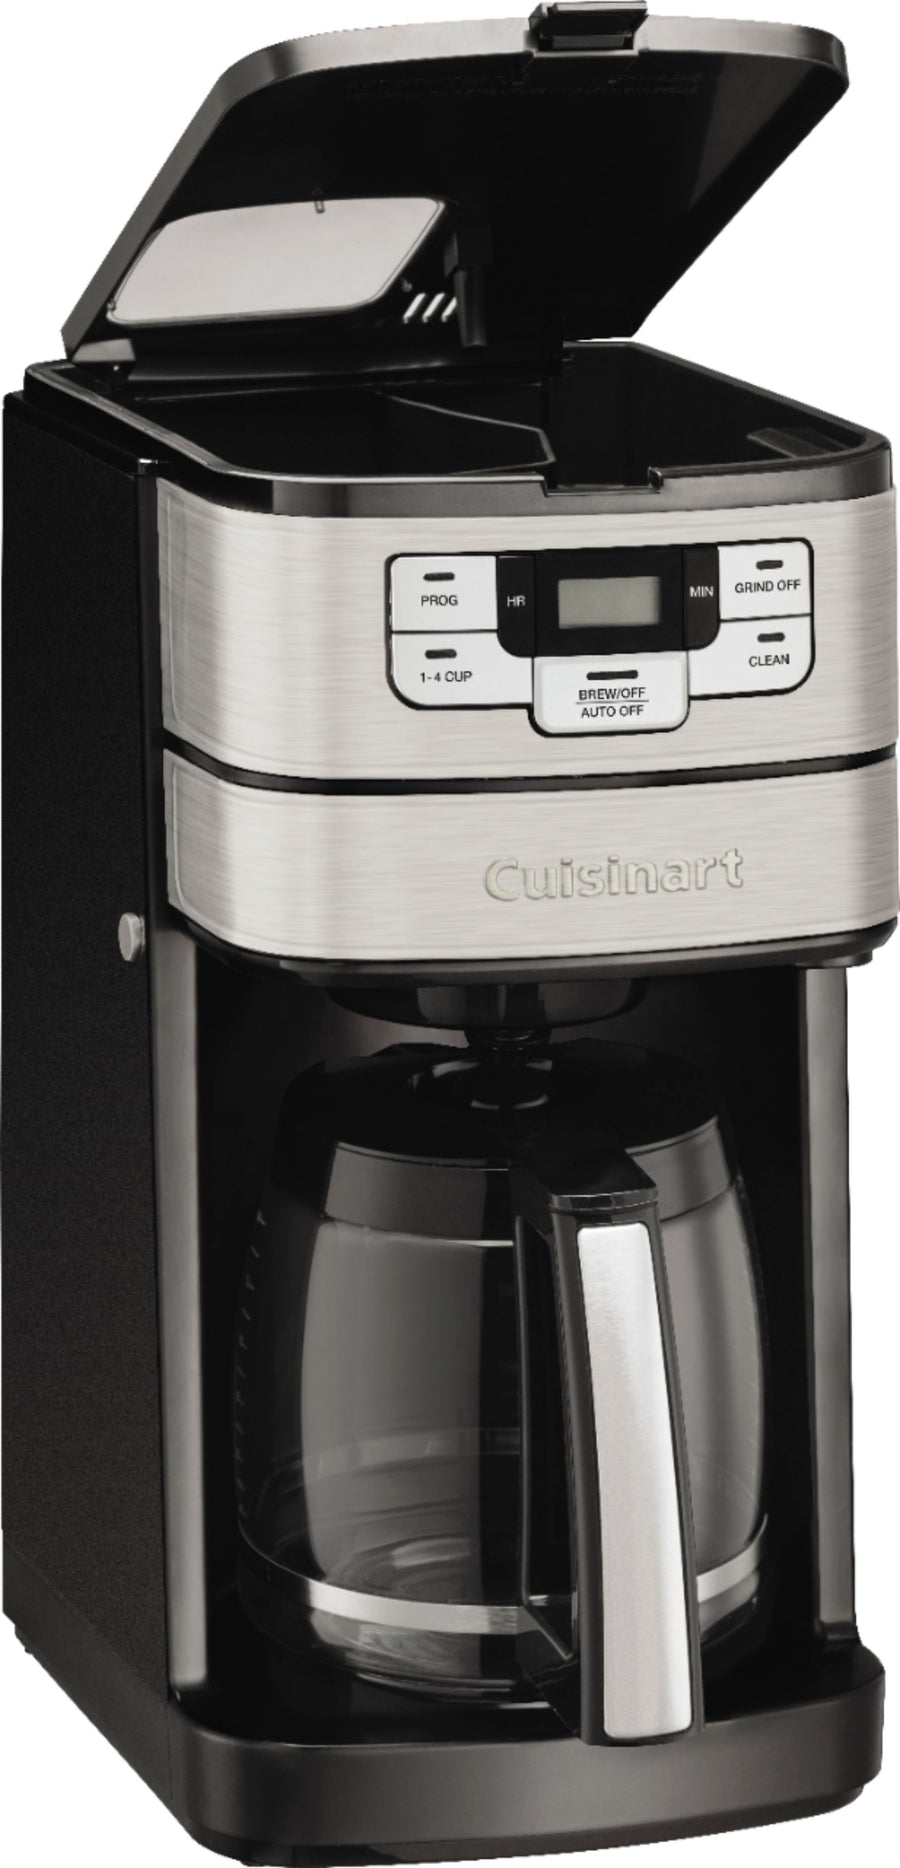 Cuisinart - 12 Cup Coffeemaker - Black/Stainless_0